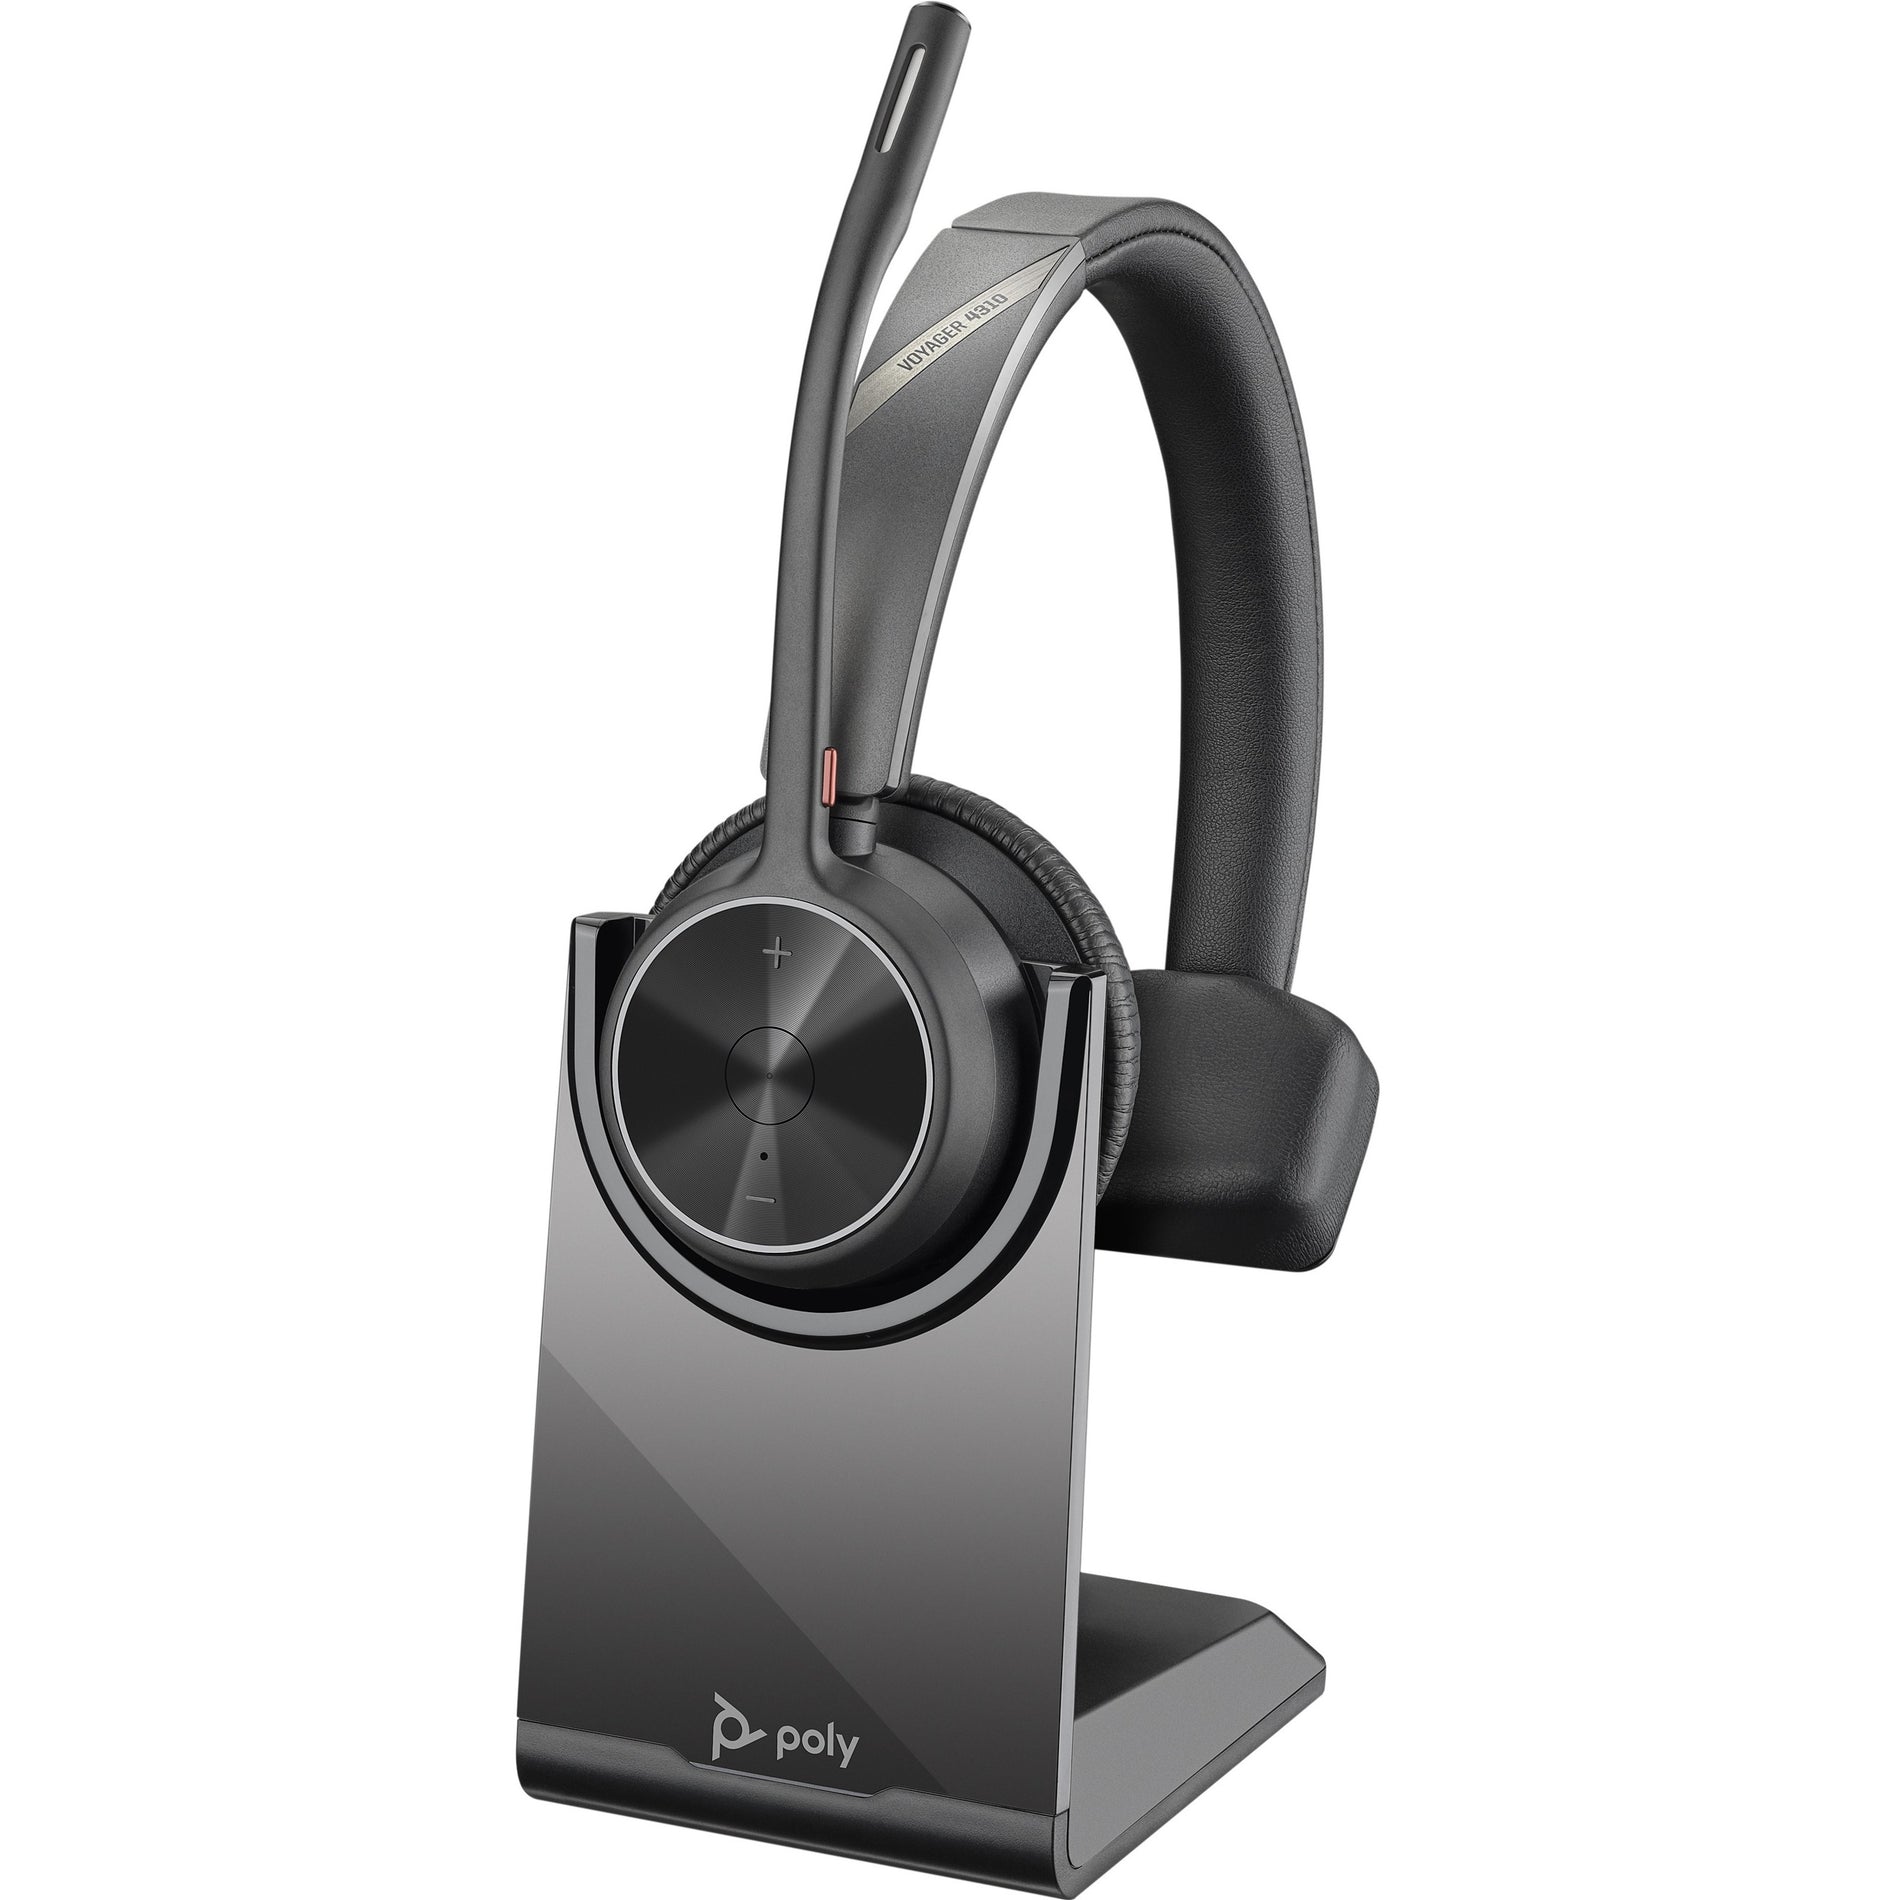 Poly 218471-02 Voyager 4300 UC 4310-M Headset, Mono, Noise Cancelling, USB Type A